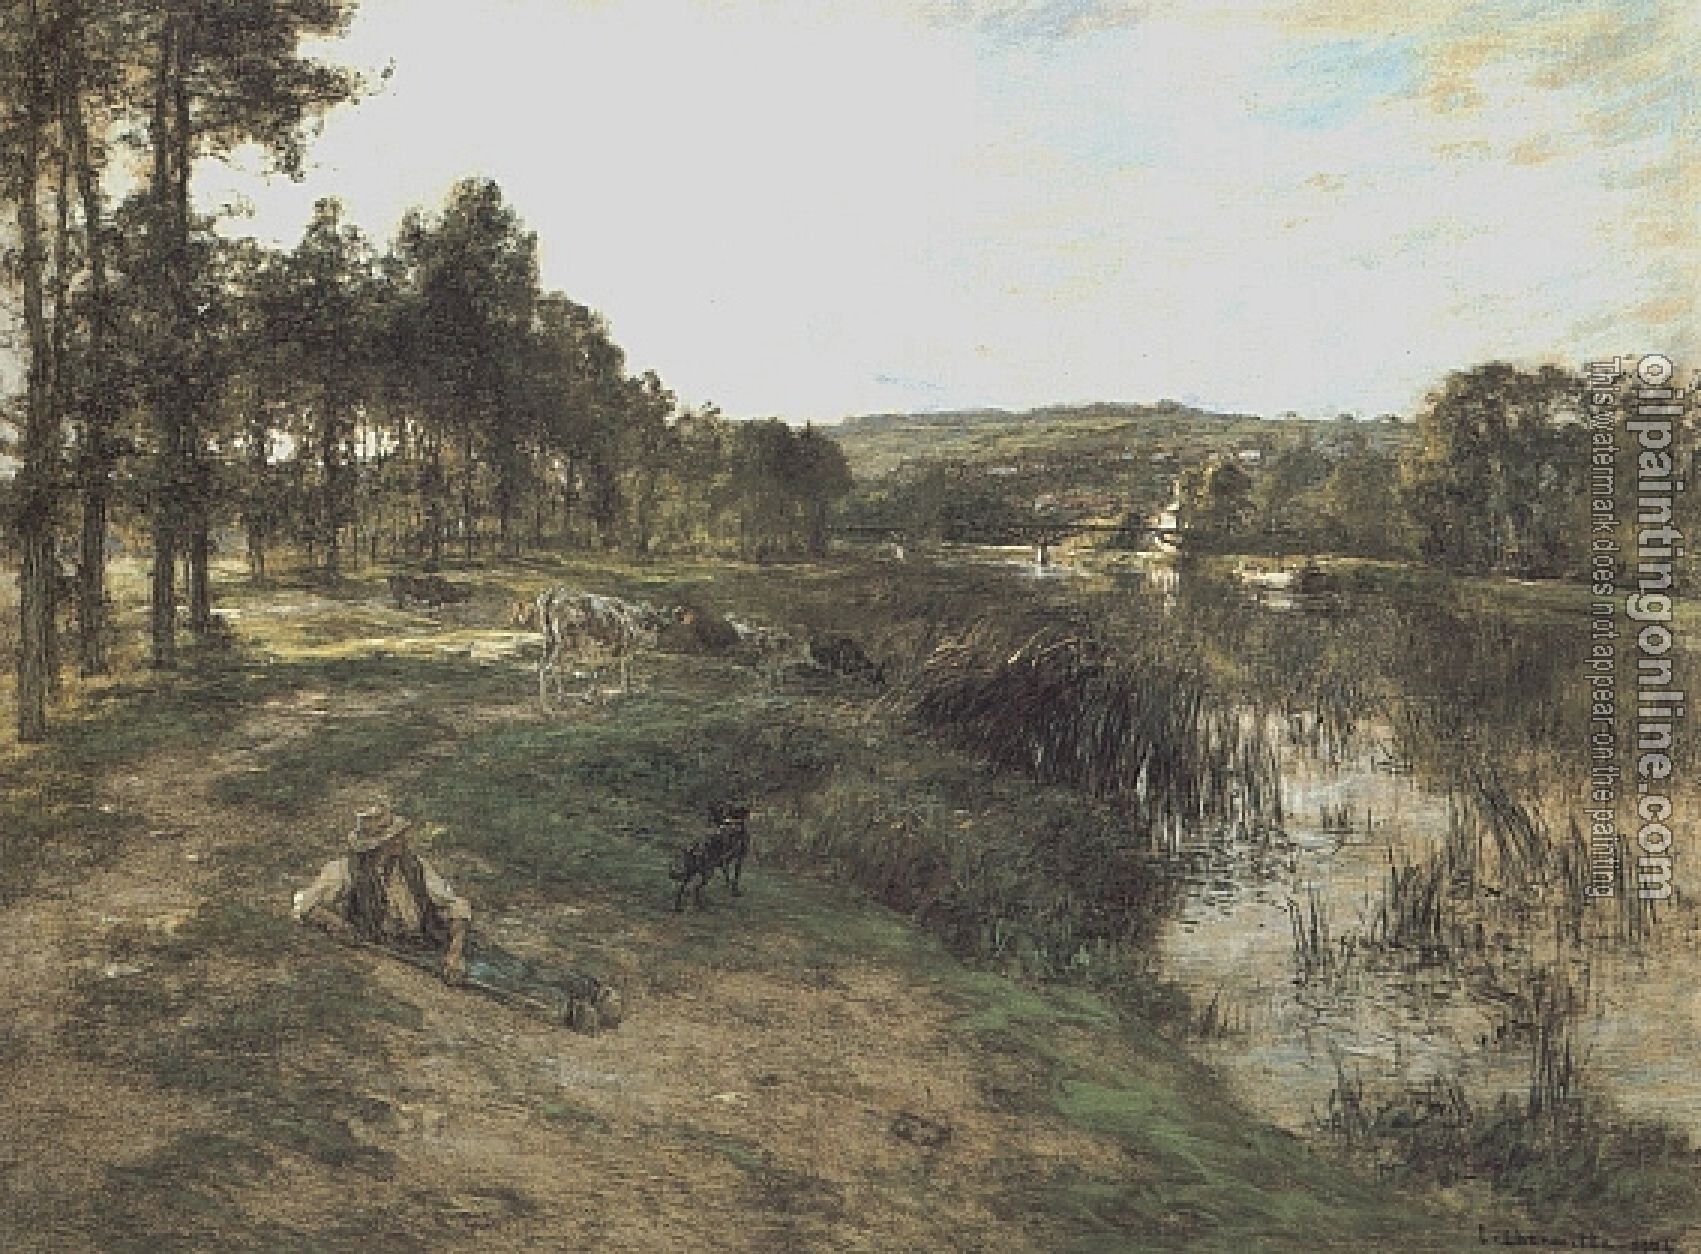 Lhermitte, Leon Augustin - Herd at the Edge of water